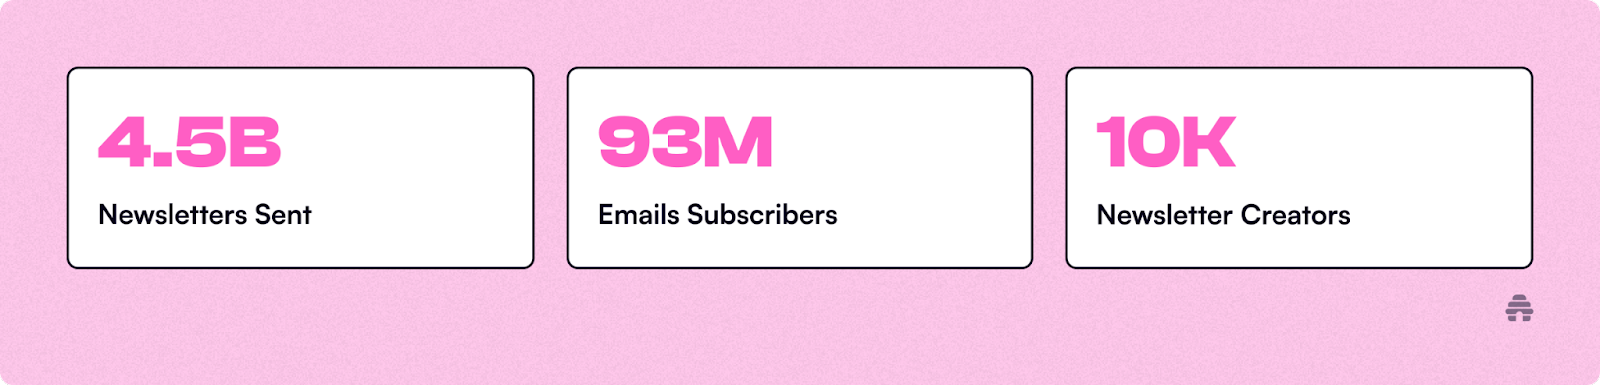 2024 State of Email Newsletters by beehiiv